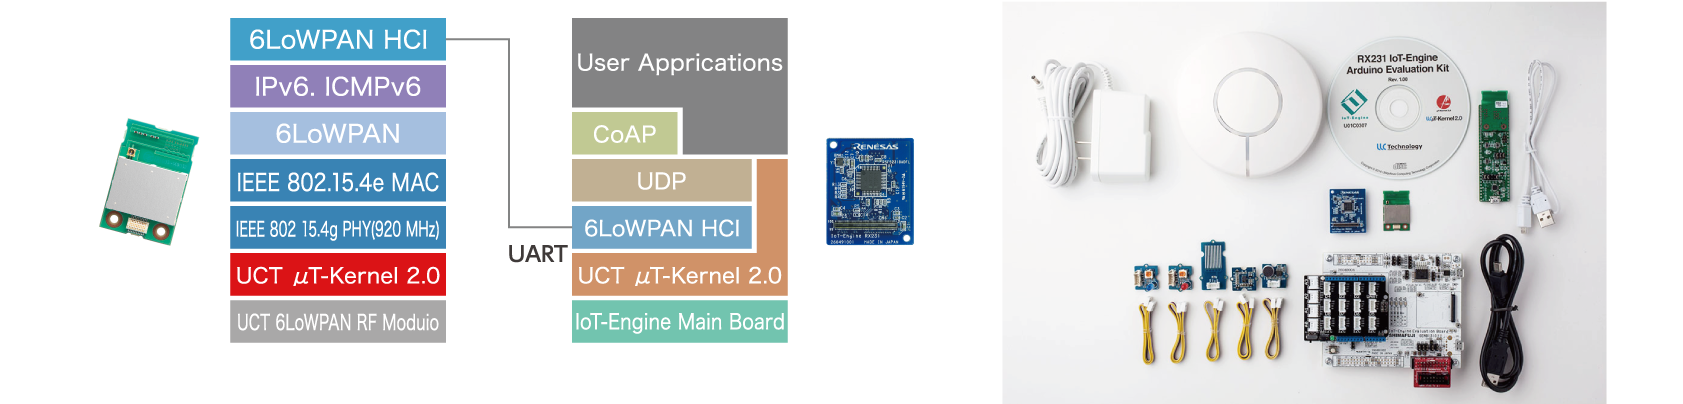 UCT 6LoWPAN for IoT-Engine ソフトウェア構成とRX231 IoT-Engine Arduino Evaluation Kit